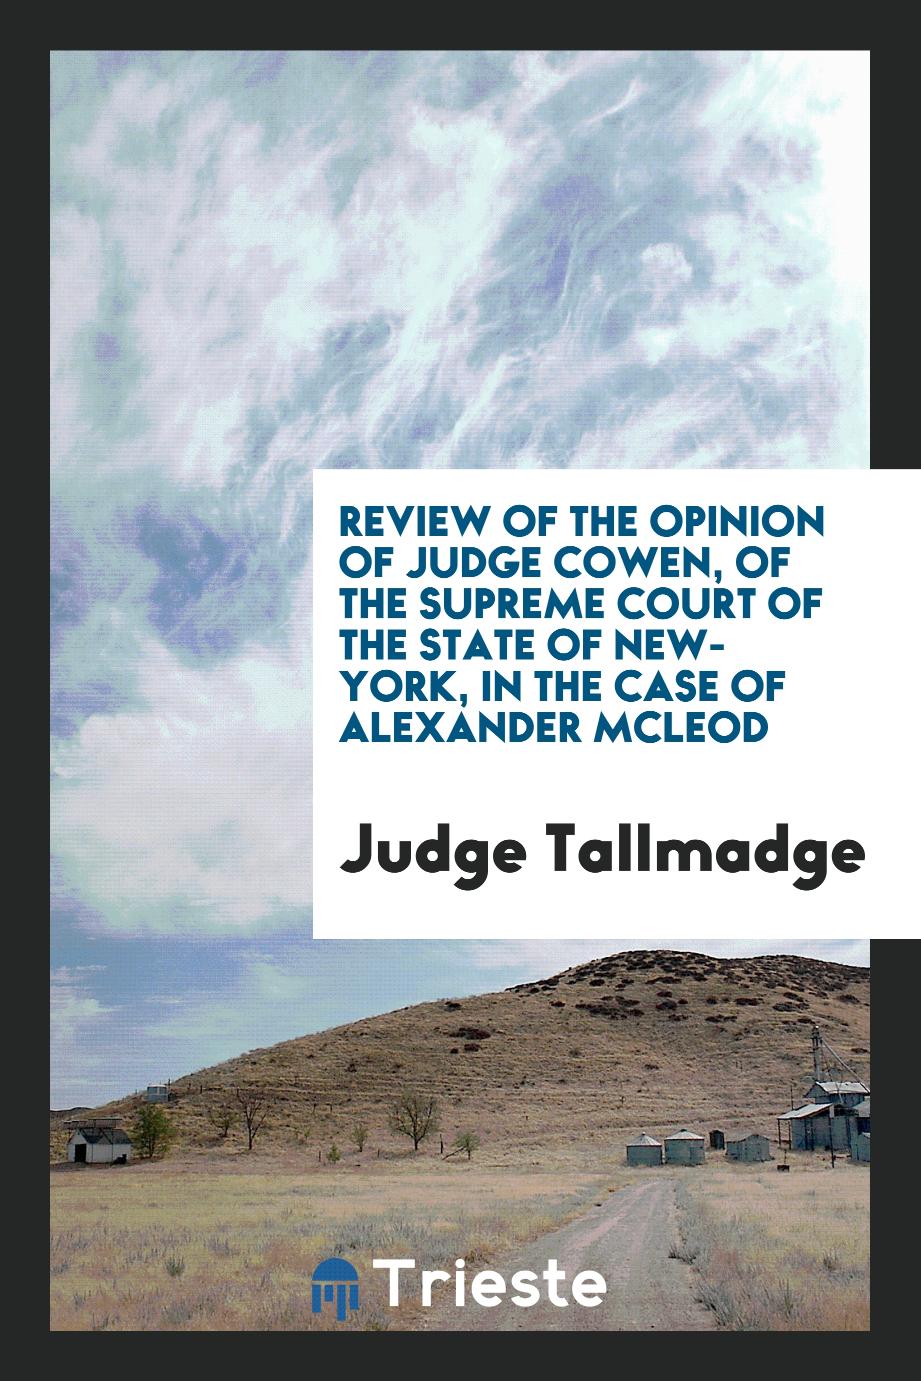 Review of the Opinion of Judge Cowen, of the Supreme Court of the State of New-York, in the Case of Alexander McLeod